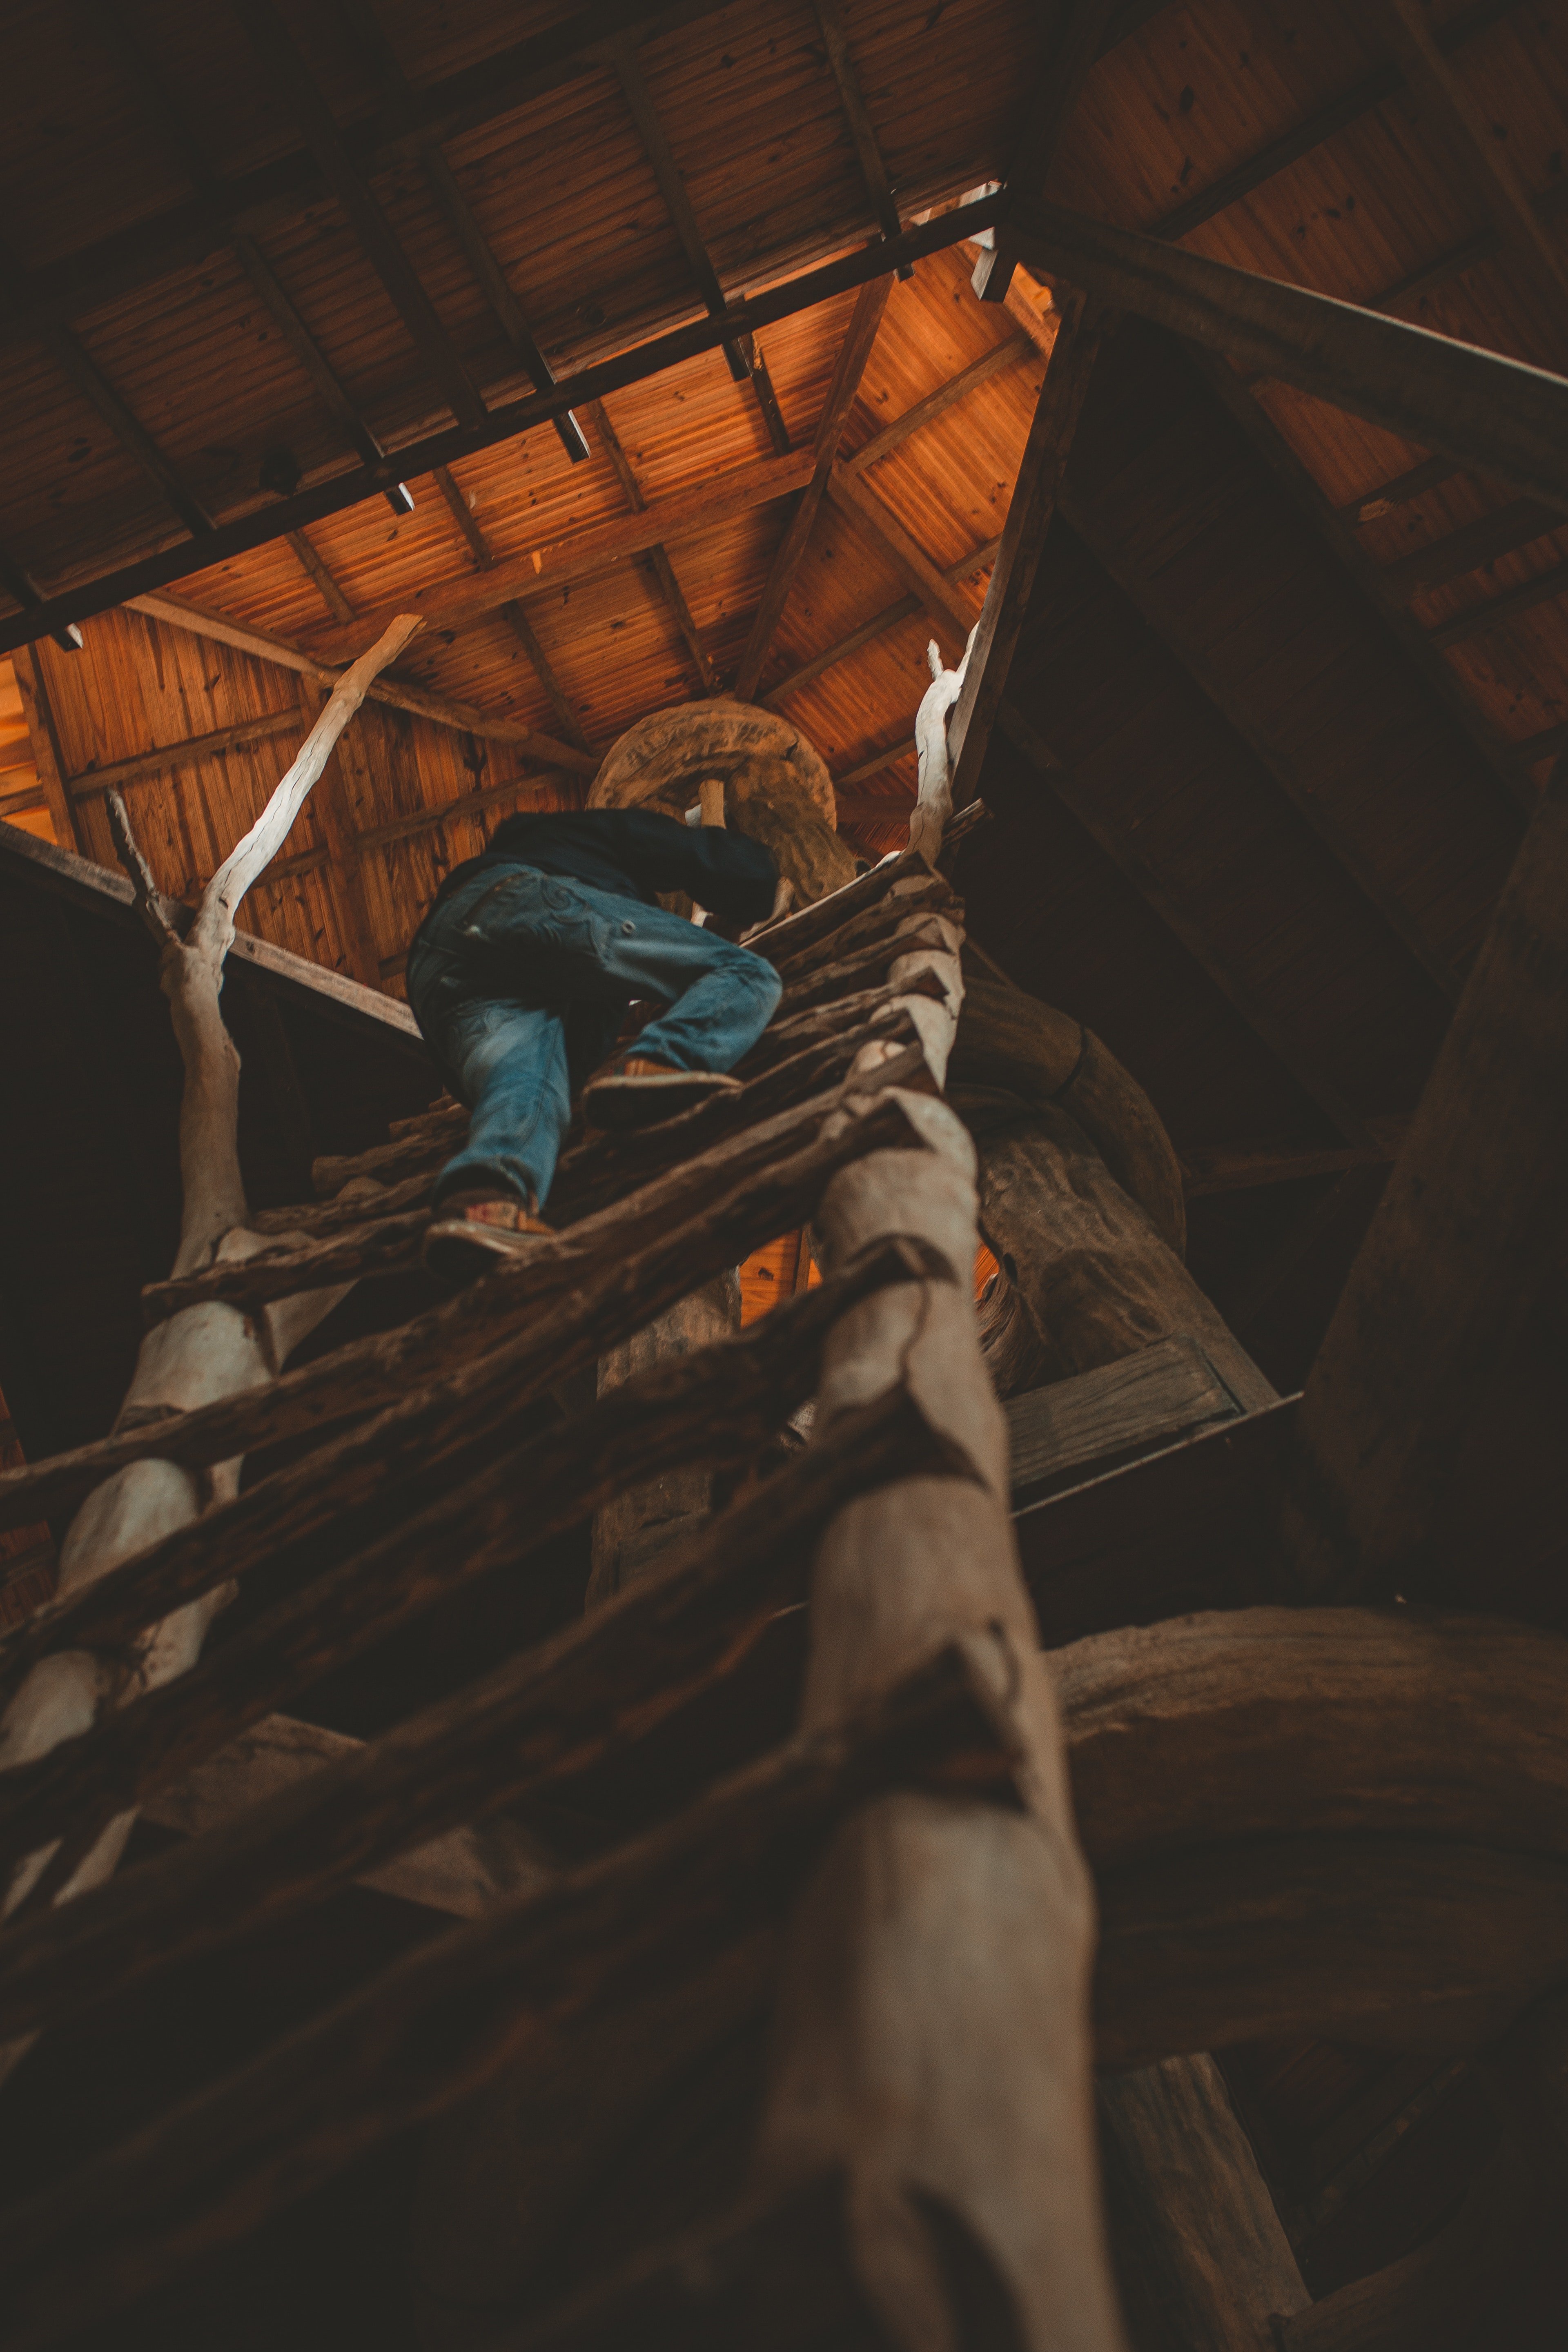 Mia fell climbing the ladder to the tree house. | Source: Pexels